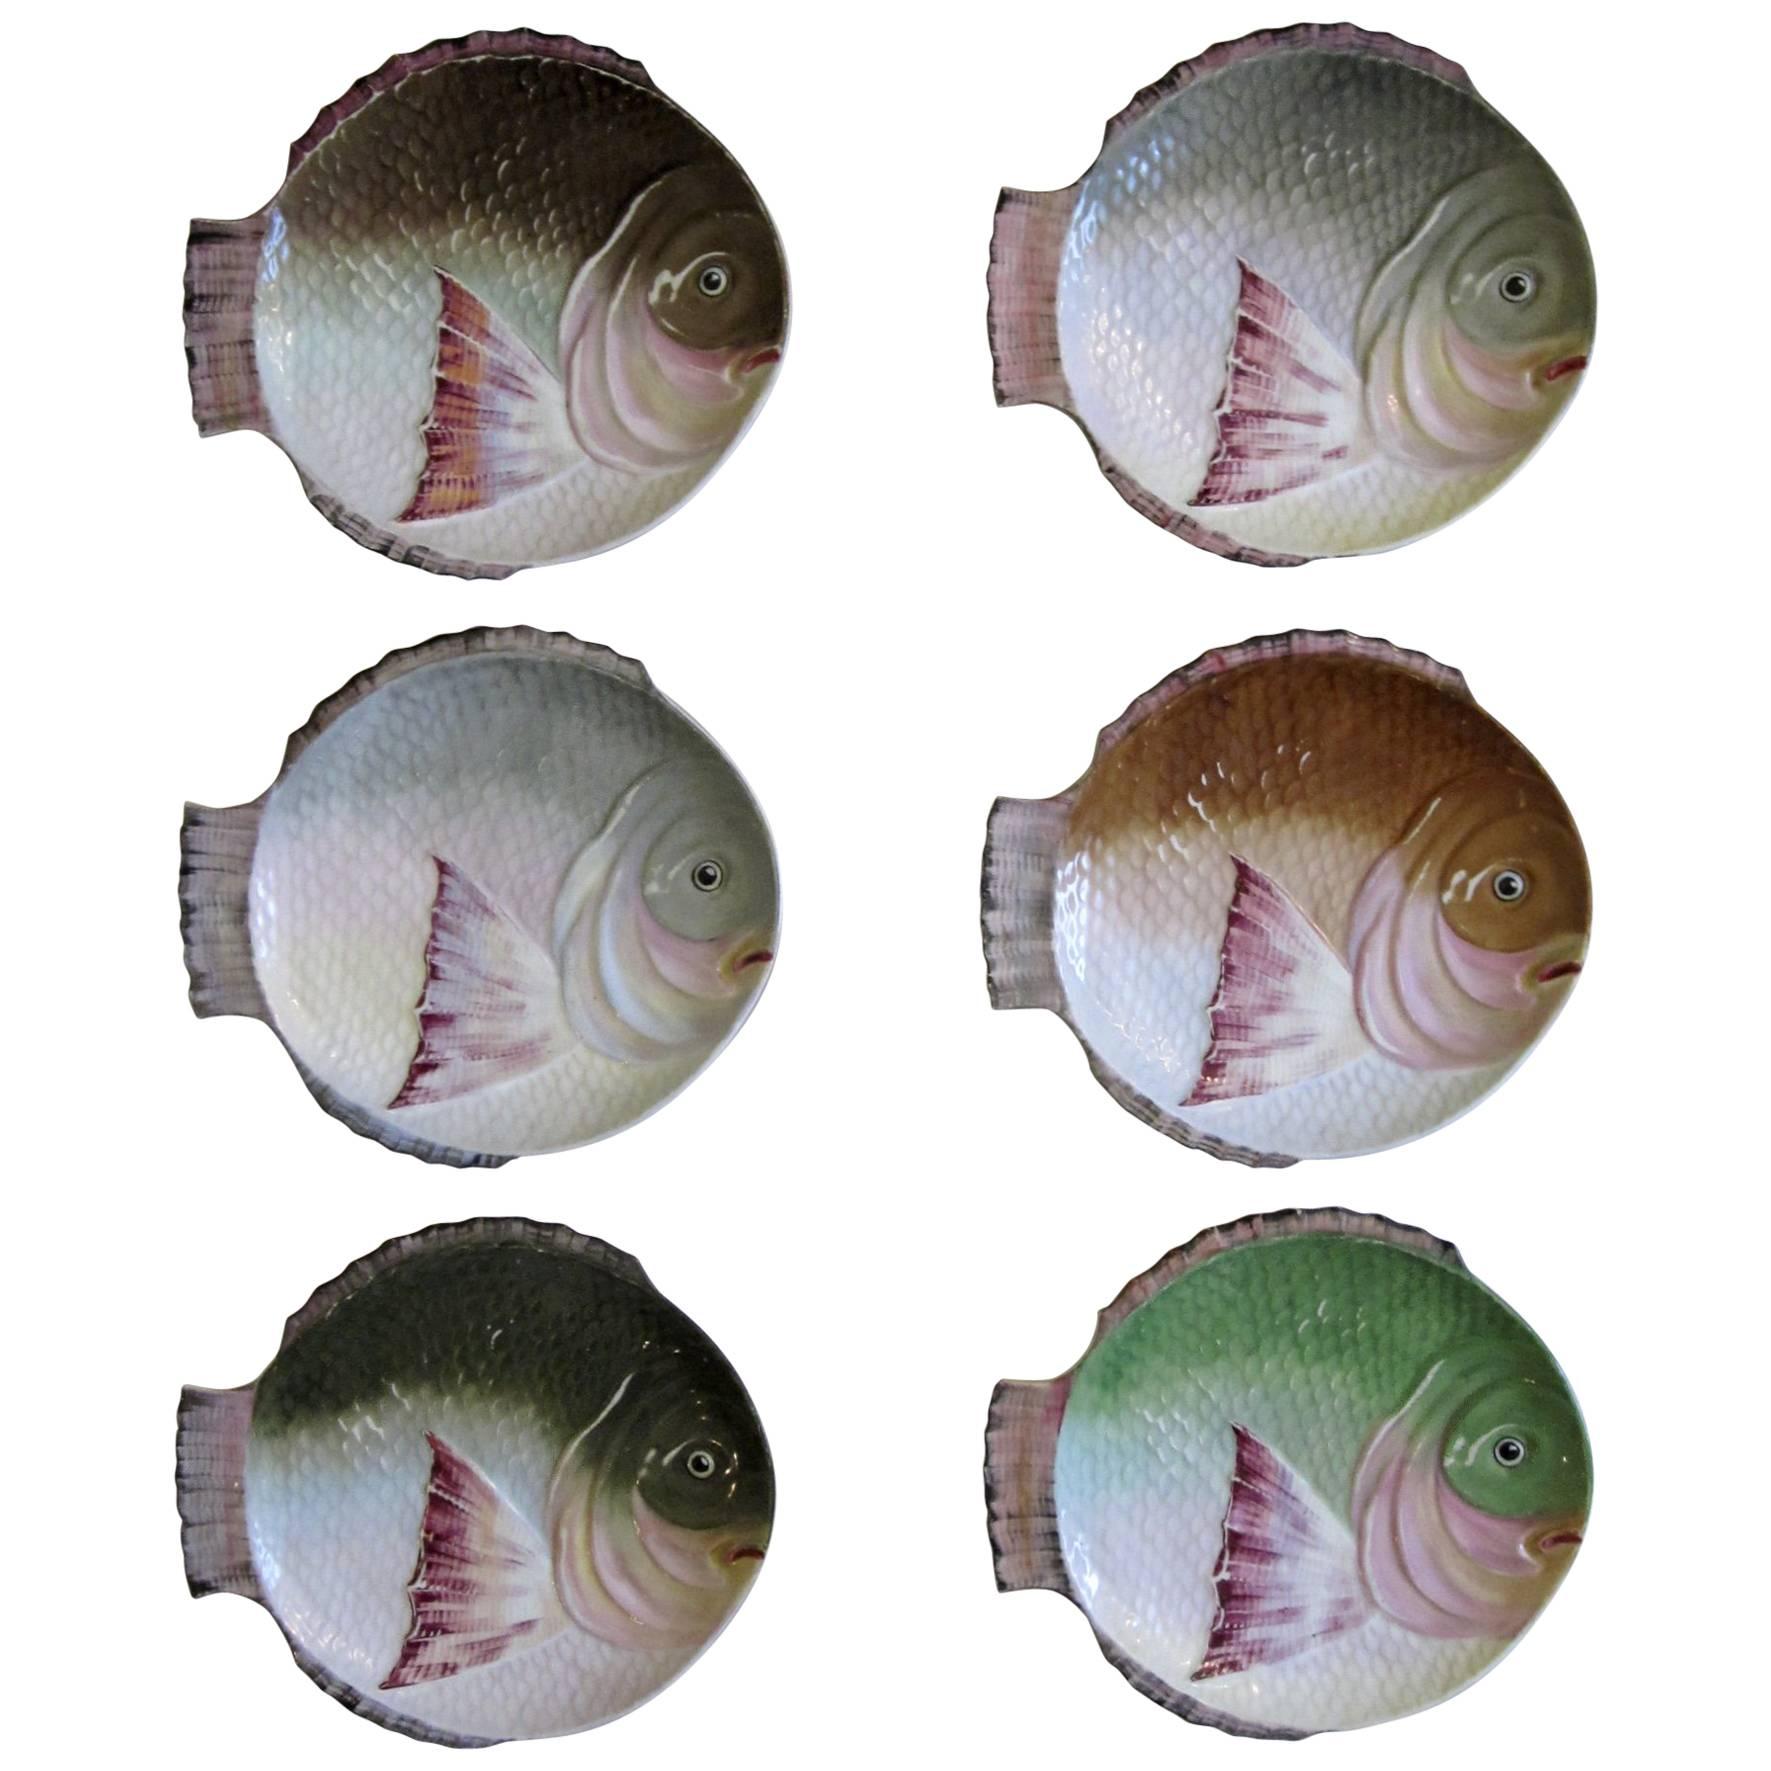 Victorian English Staffordshire Hand-Painted Porcelain Fish Plates, Set of Six